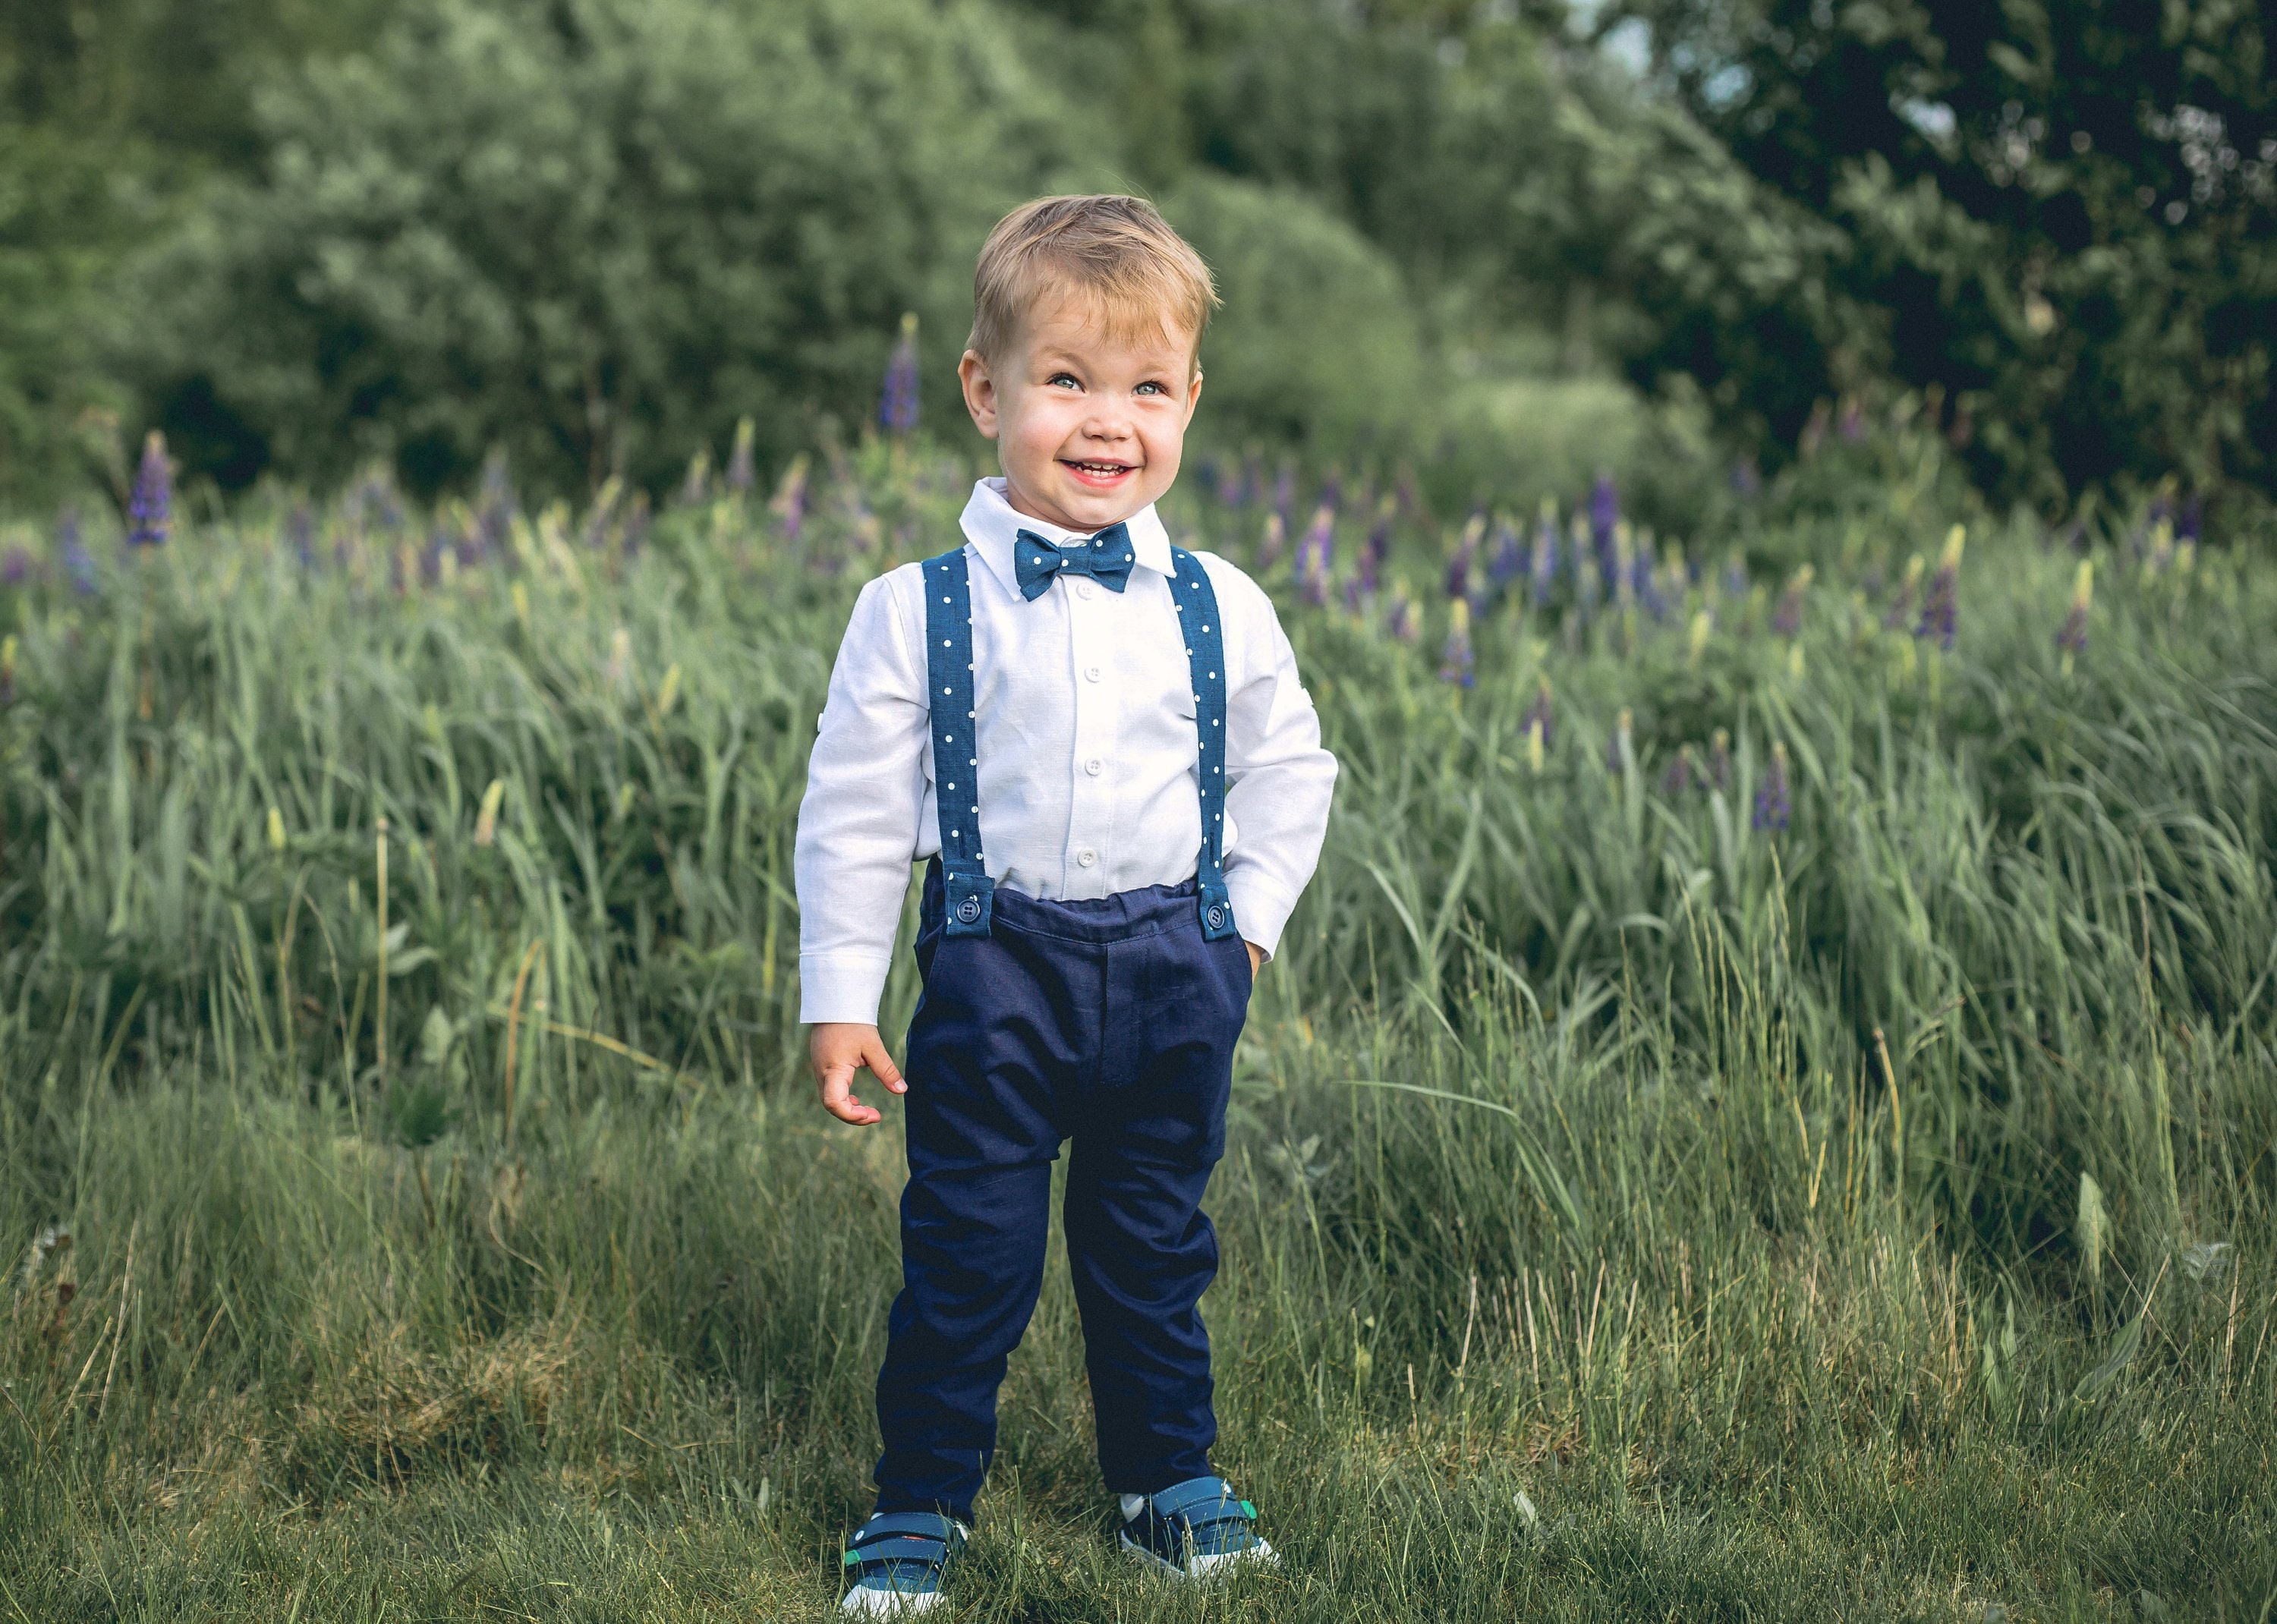 Boys Formal Wear Ring bearer outfit Page Boy Outfit Boys Baptism Outfit